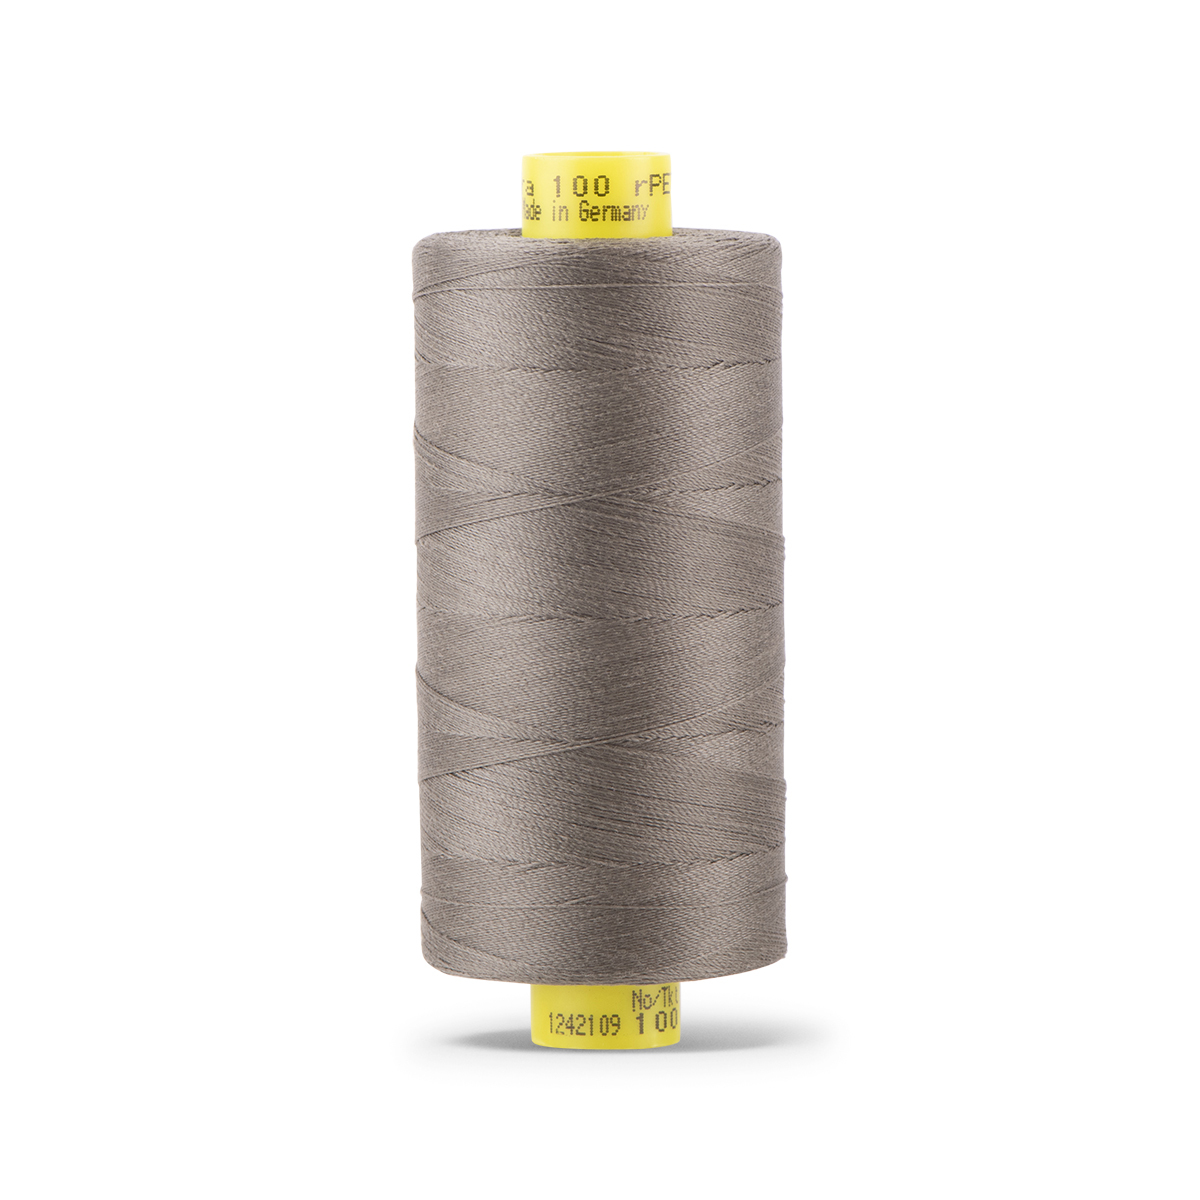 Gütermann All Purpose rPET Recycled Thread - Light Lime Green 334